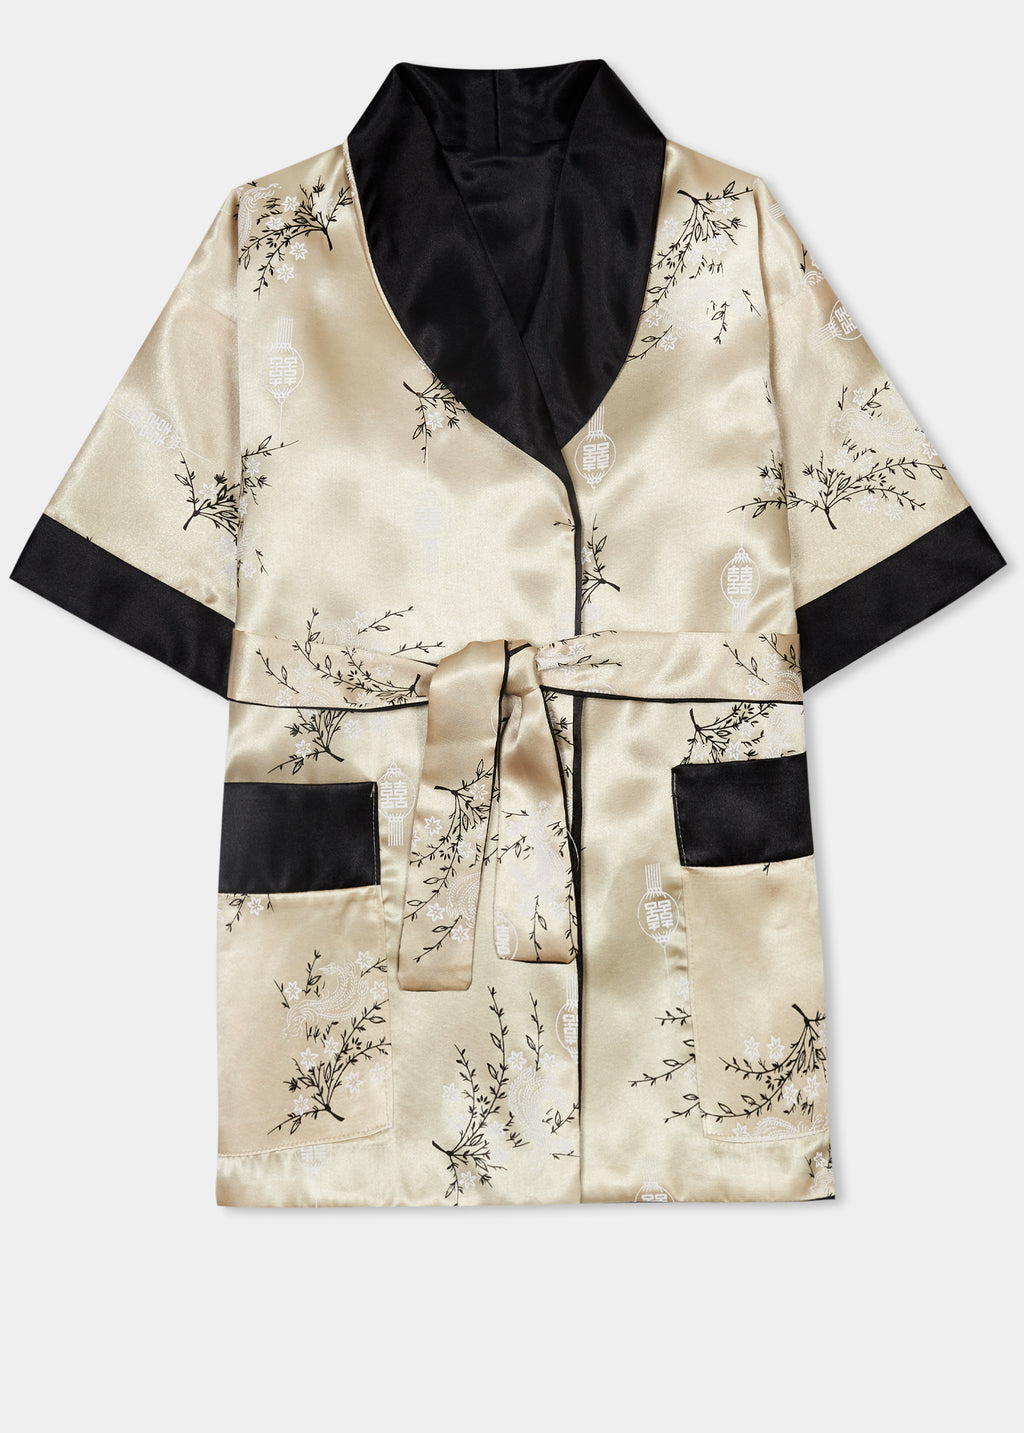 Traditionally styled fully reversible kimono with shawl collar, patch pockets and tie belt. Manufactured in a classic gold silky rayon/polyester with a bird of paradise and Chinese lantern print - a symbol of joy and good fortune to one side. Solid black with large dragon embroidery to reverse side.